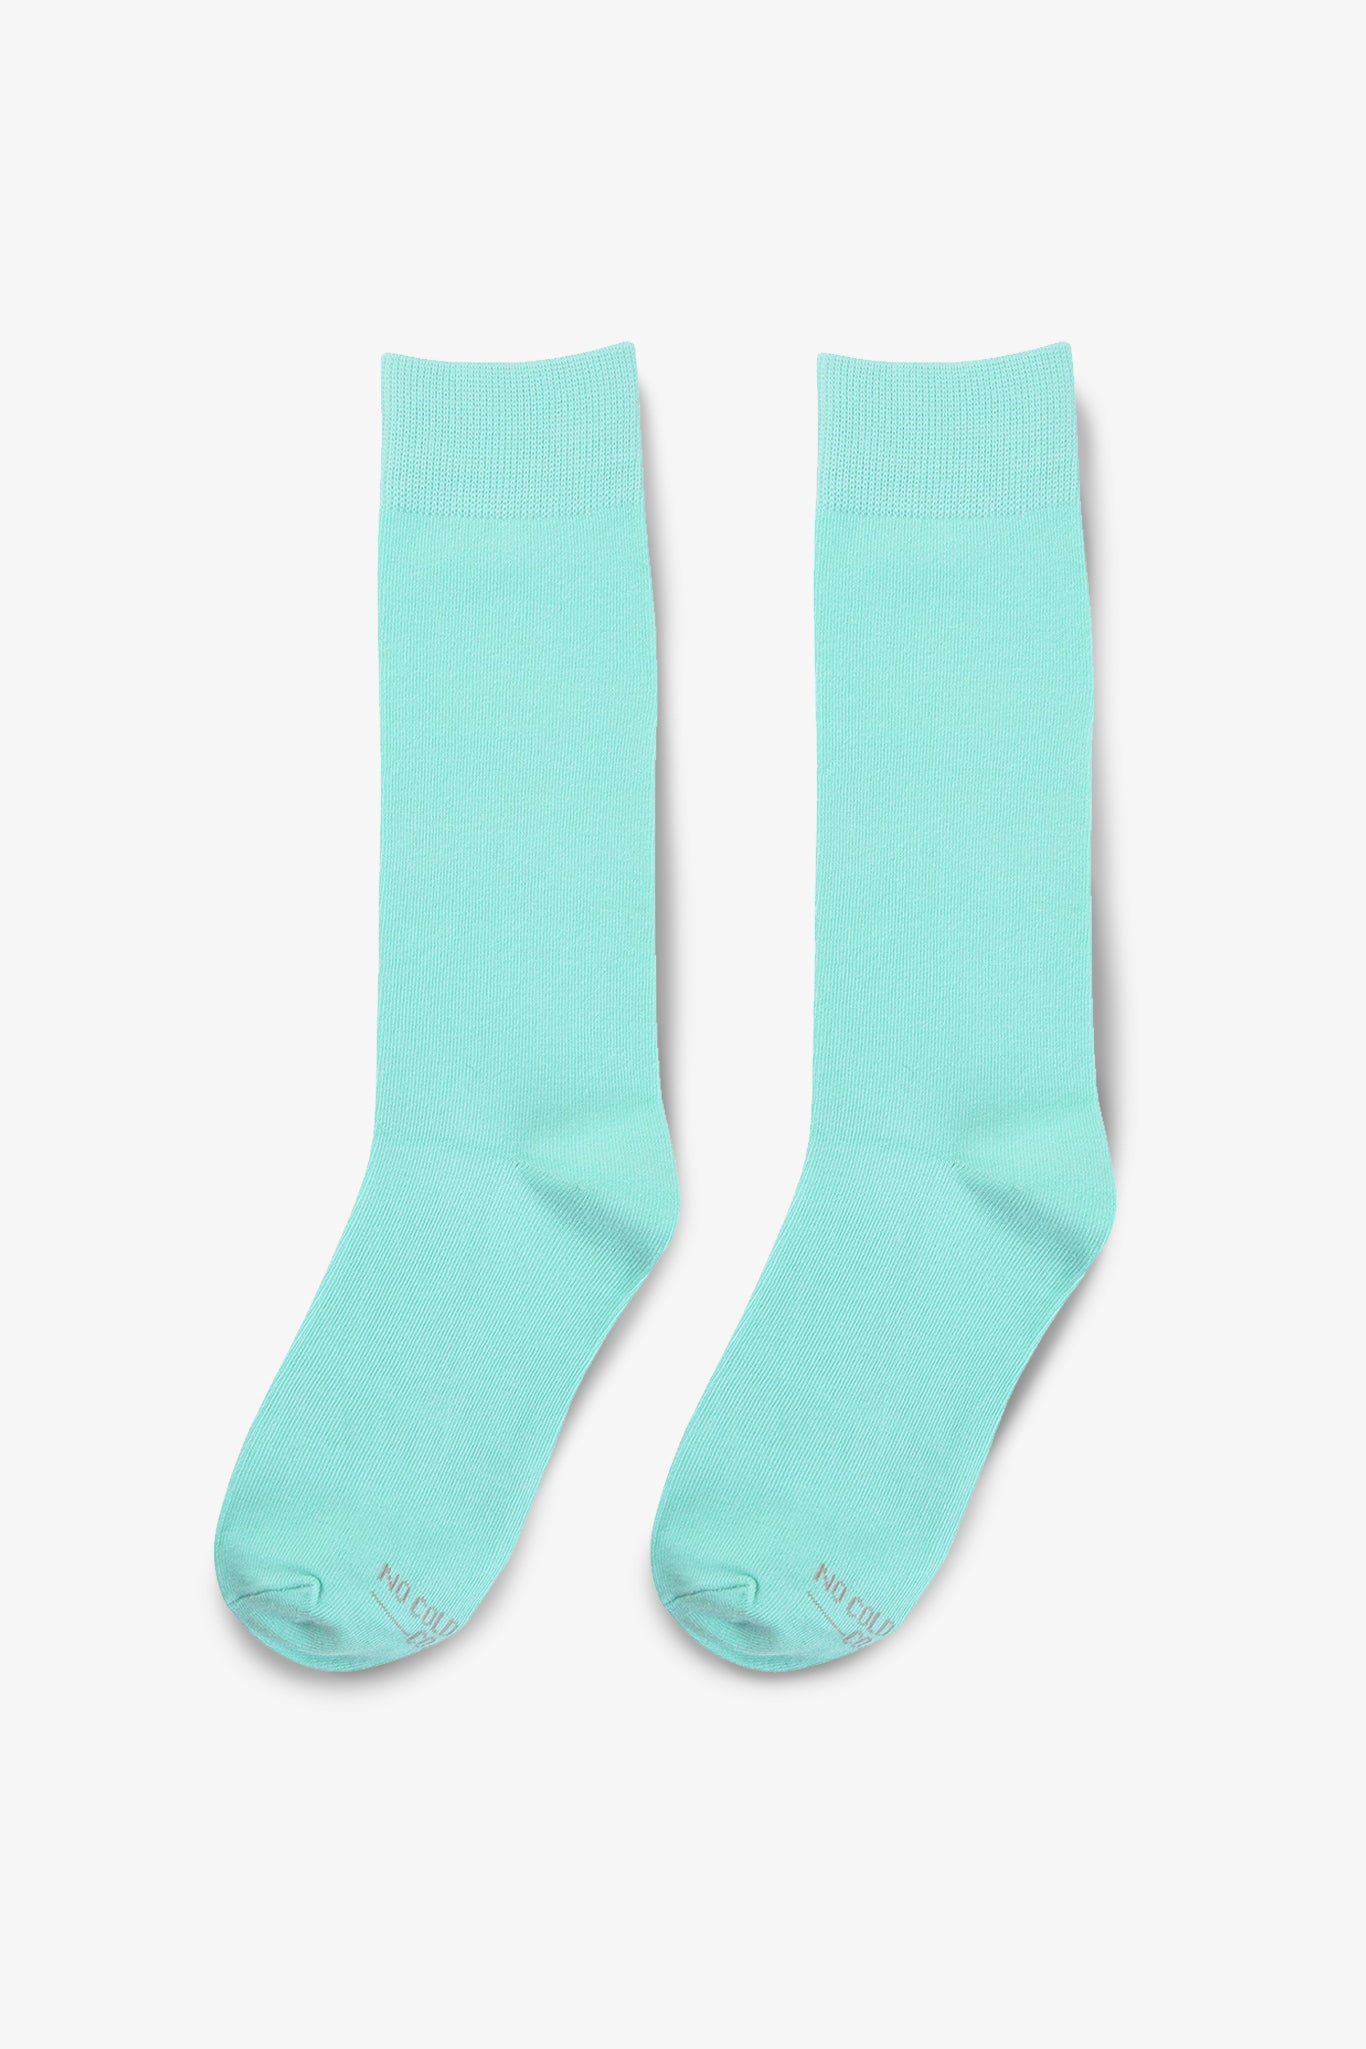 Solid Groomsmen Socks By No Cold Feet - Mint